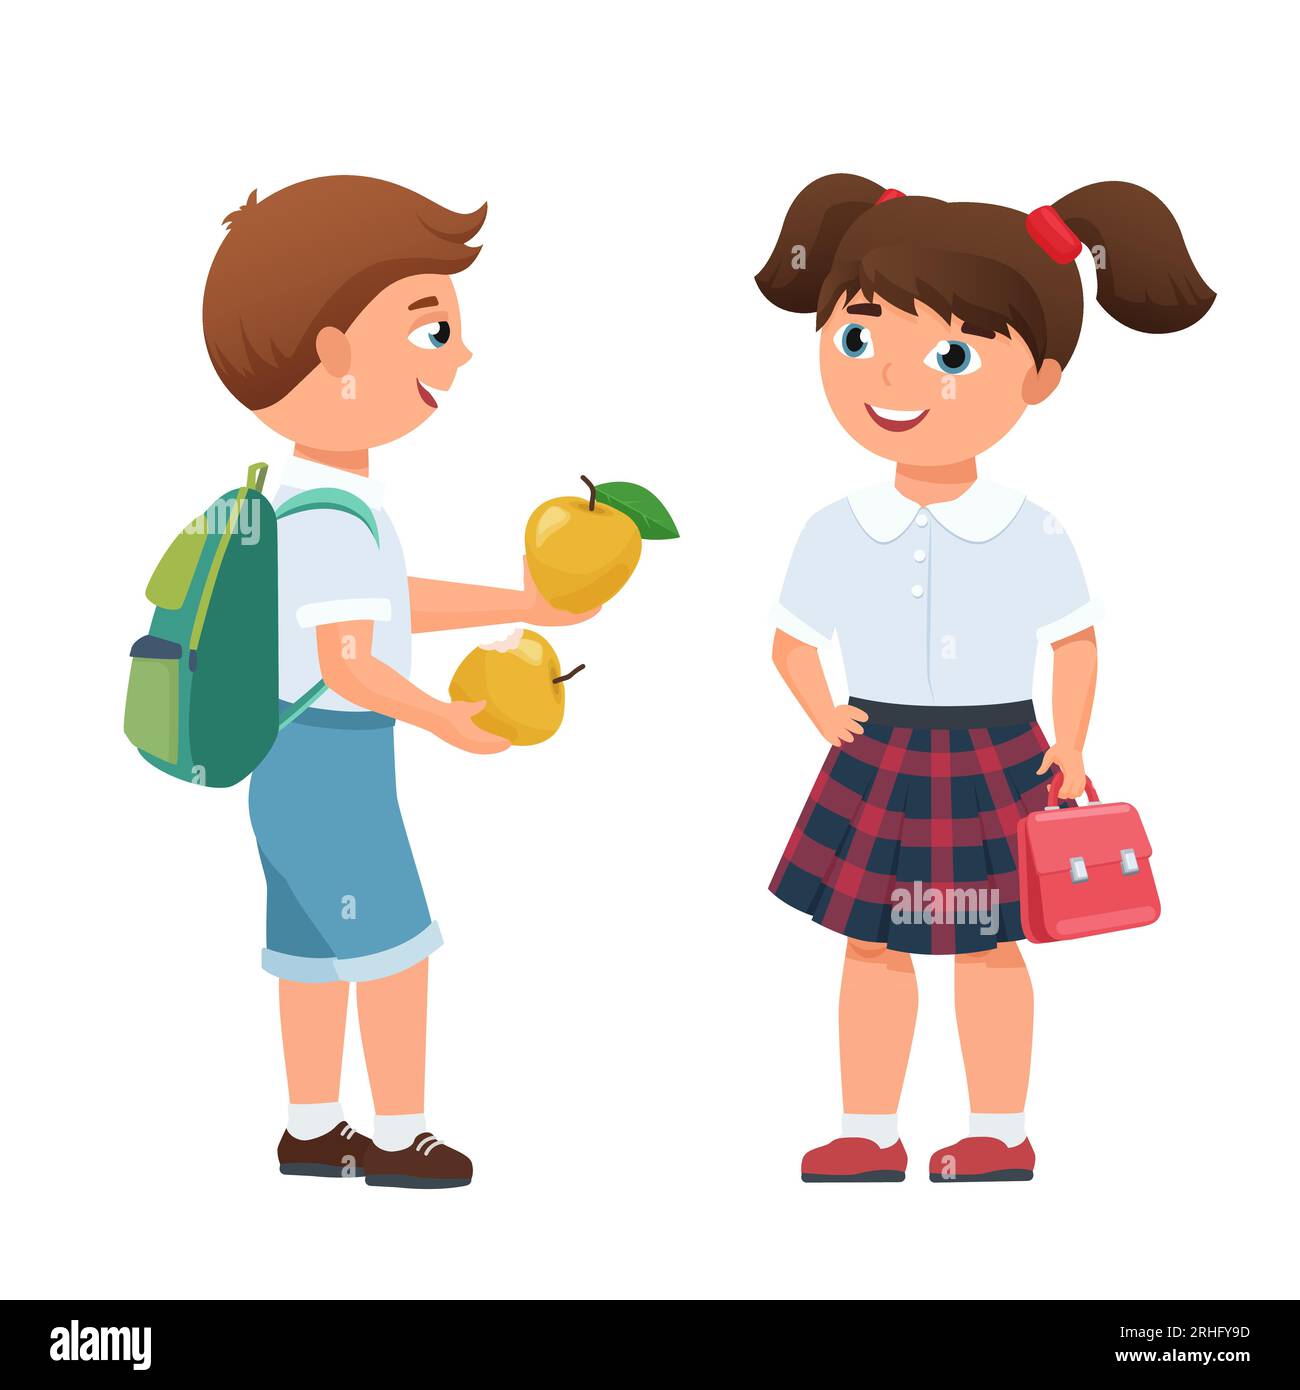 School kids with fruits. School pupil, little girl and boy with bags ...